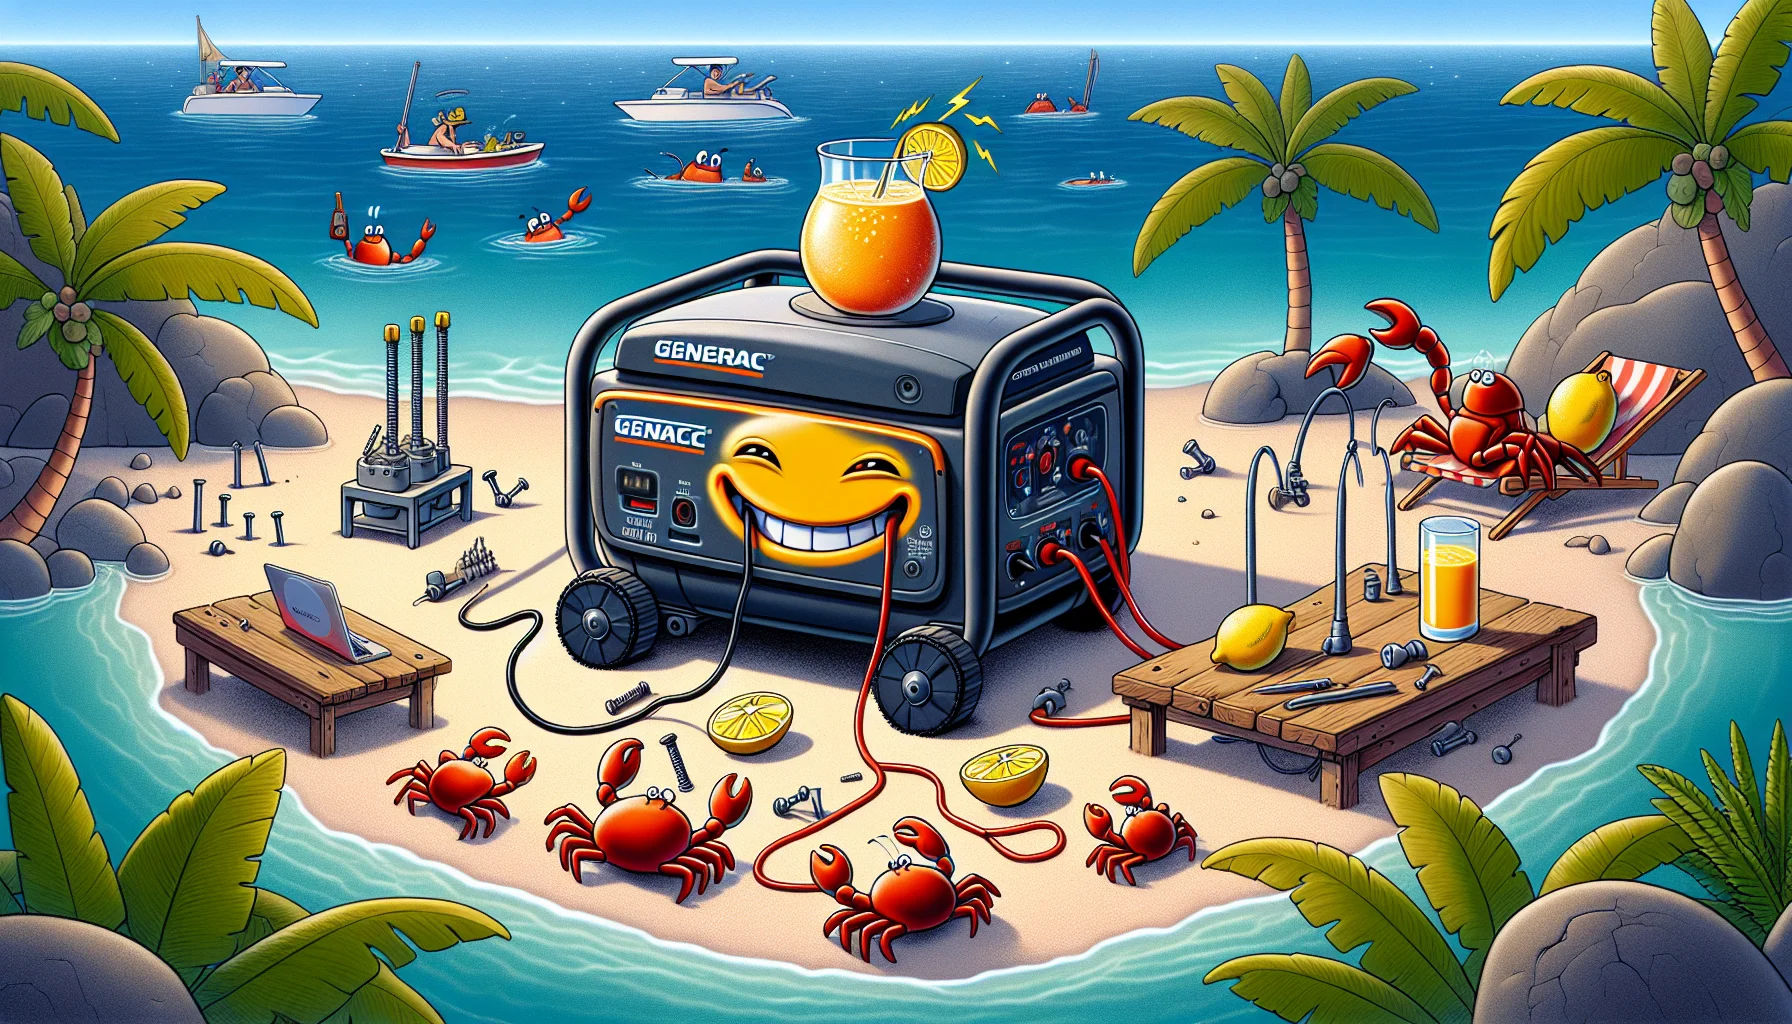 Design a humorous scene of a Generac propane generator in an unexpected situation. Perhaps it's situated on a tropical beach, churning out smoothies for a group of sunbathing robots. The generator appears satisfied, almost grinning, with a speech bubble reading 'Get juiced up with Generac!'. Around the area, some crabs are conducting electricity experiments using lemons, wires, and nails. In the distant sea, there is a pod of dolphins jumping with joy, seemingly rejoicing in the abundance of power. The playful scene presents a fun way to tout the power of a generator while bringing a smile to the viewer's face.